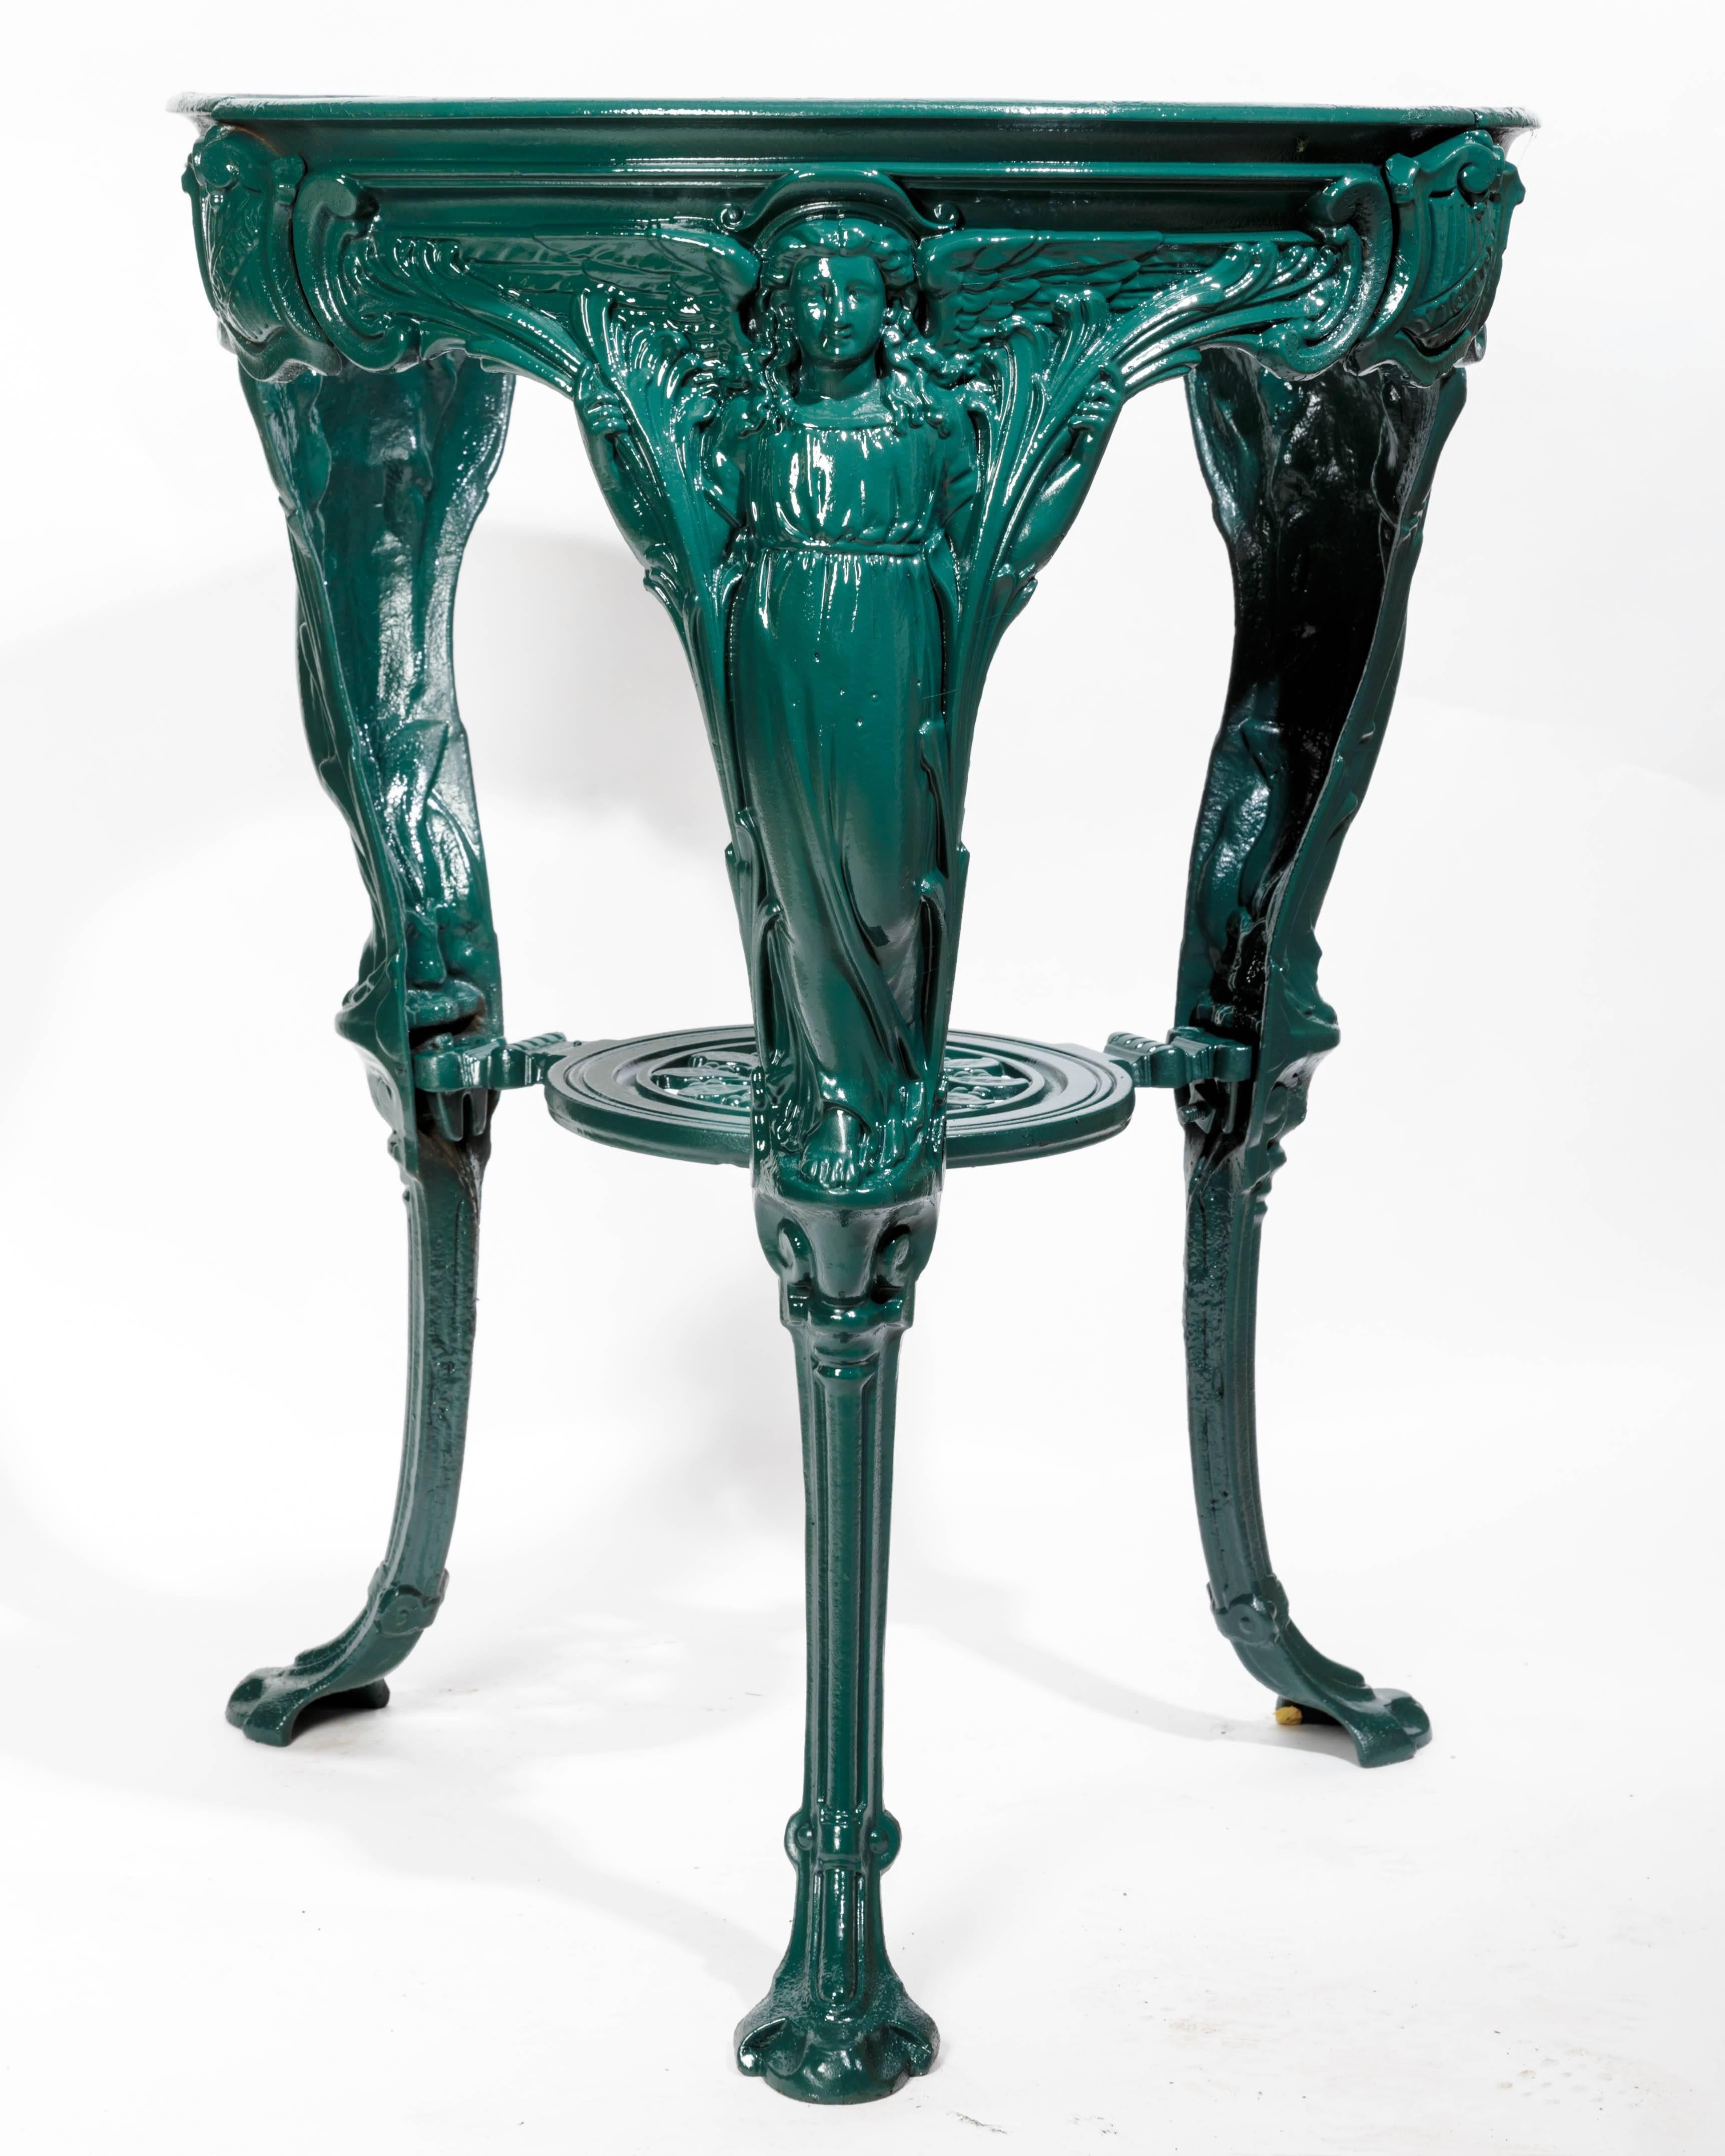 English cast iron round victory pub table in the Art Nouveau style. Each leg is a winged female figure representing victory. The sides are joined by shields with the inscription victory, possibly to celebrate the victory of the Boer or first world